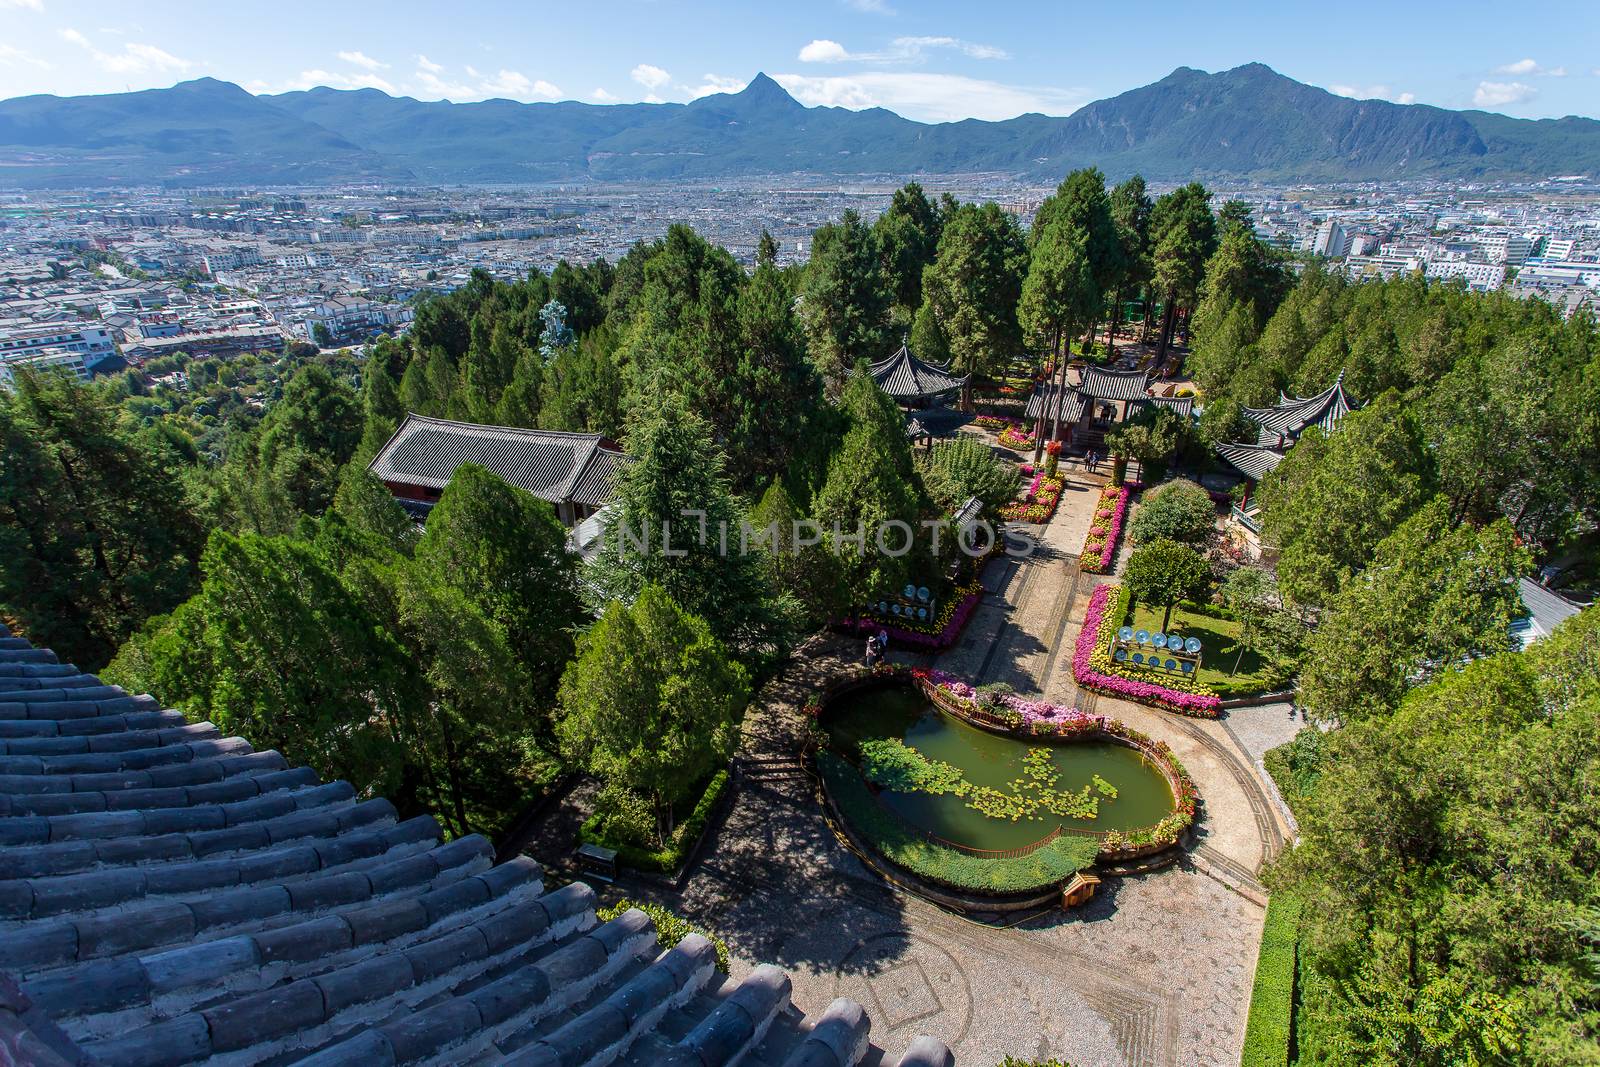 The view from Pagoda (Wangu Tower) on Lion Hill. Located in Old Town of Lijiang,